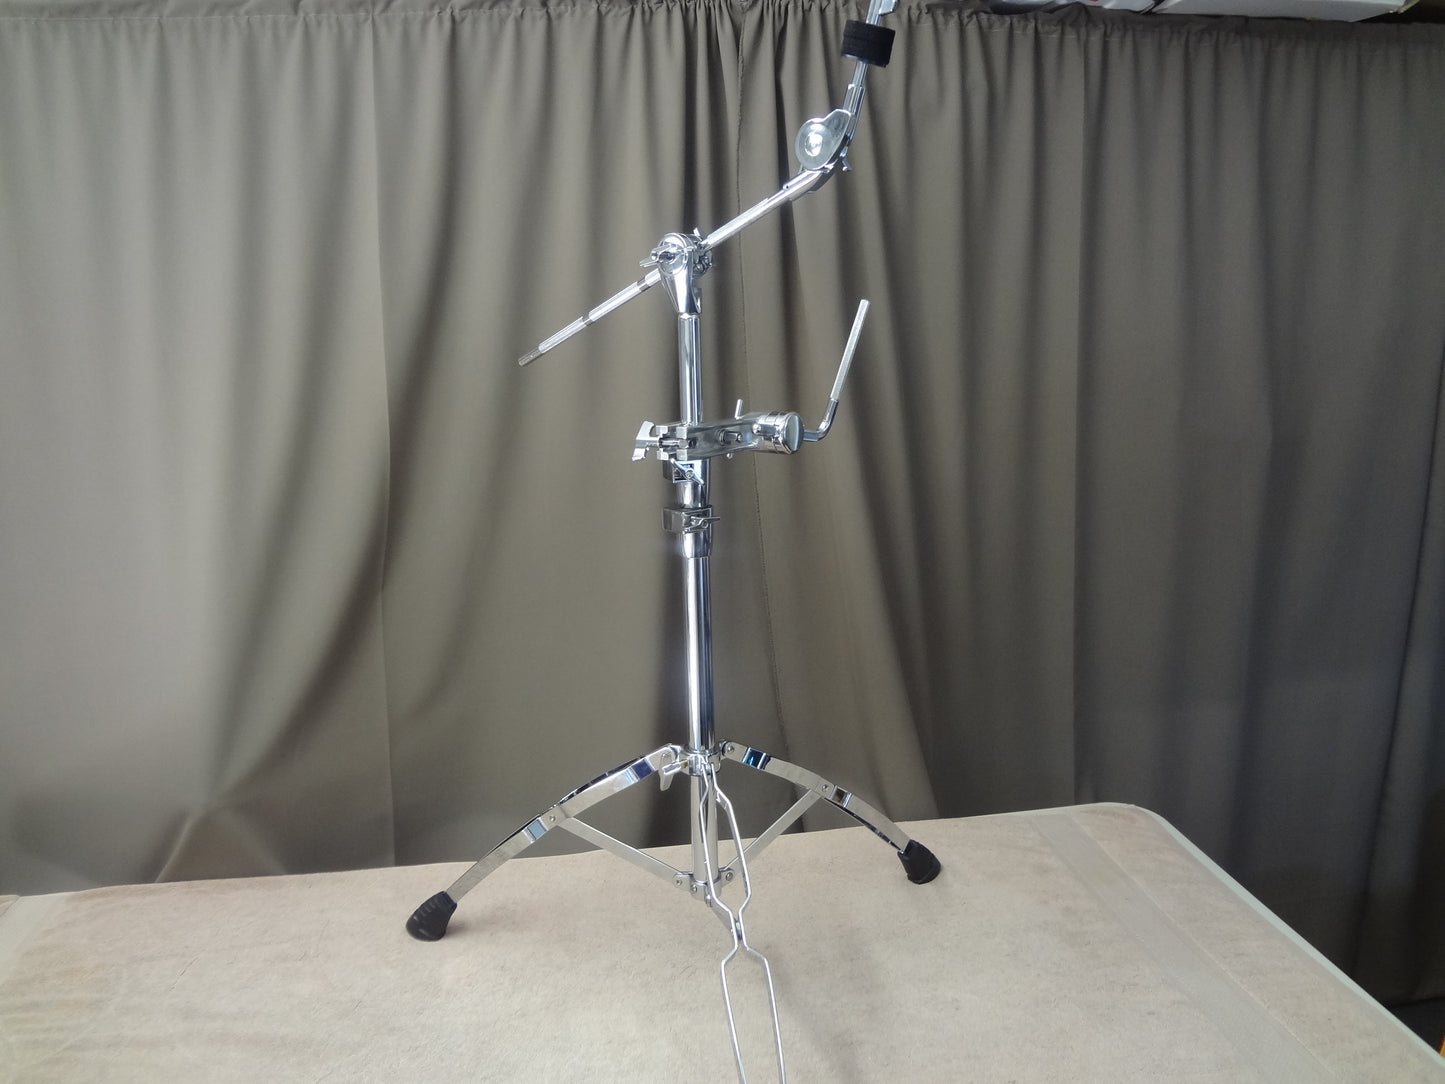 5 PIECE CUSTOM BUILT ELECTRONIC DRUM KIT - (ELECTRONIC CYMBALS AND HARDWARE INCLUDED)